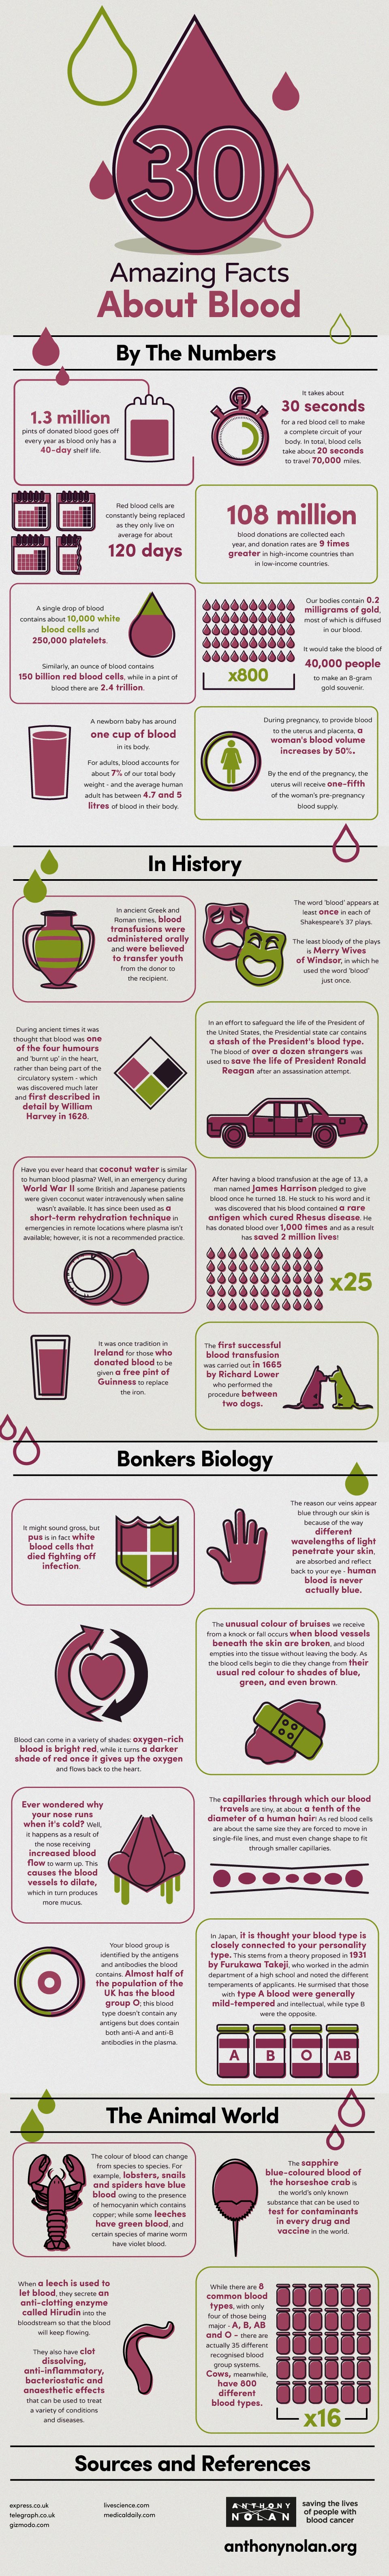 Bloody Trivia! 30 Unusual Facts About Blood - Infographic